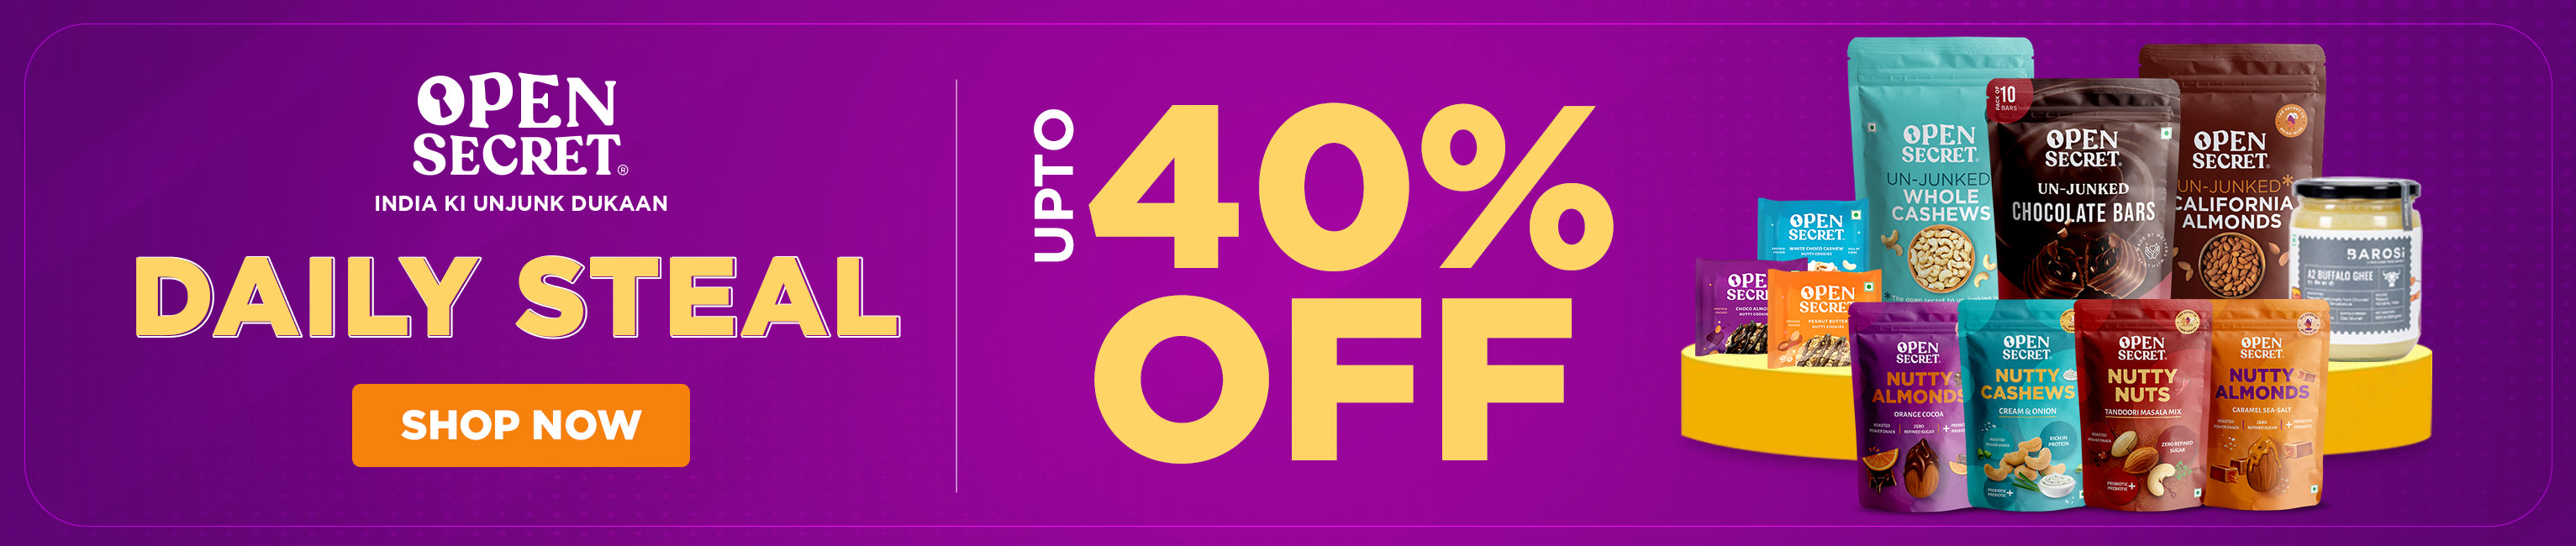 Daily Steal -Upto 40% OFF